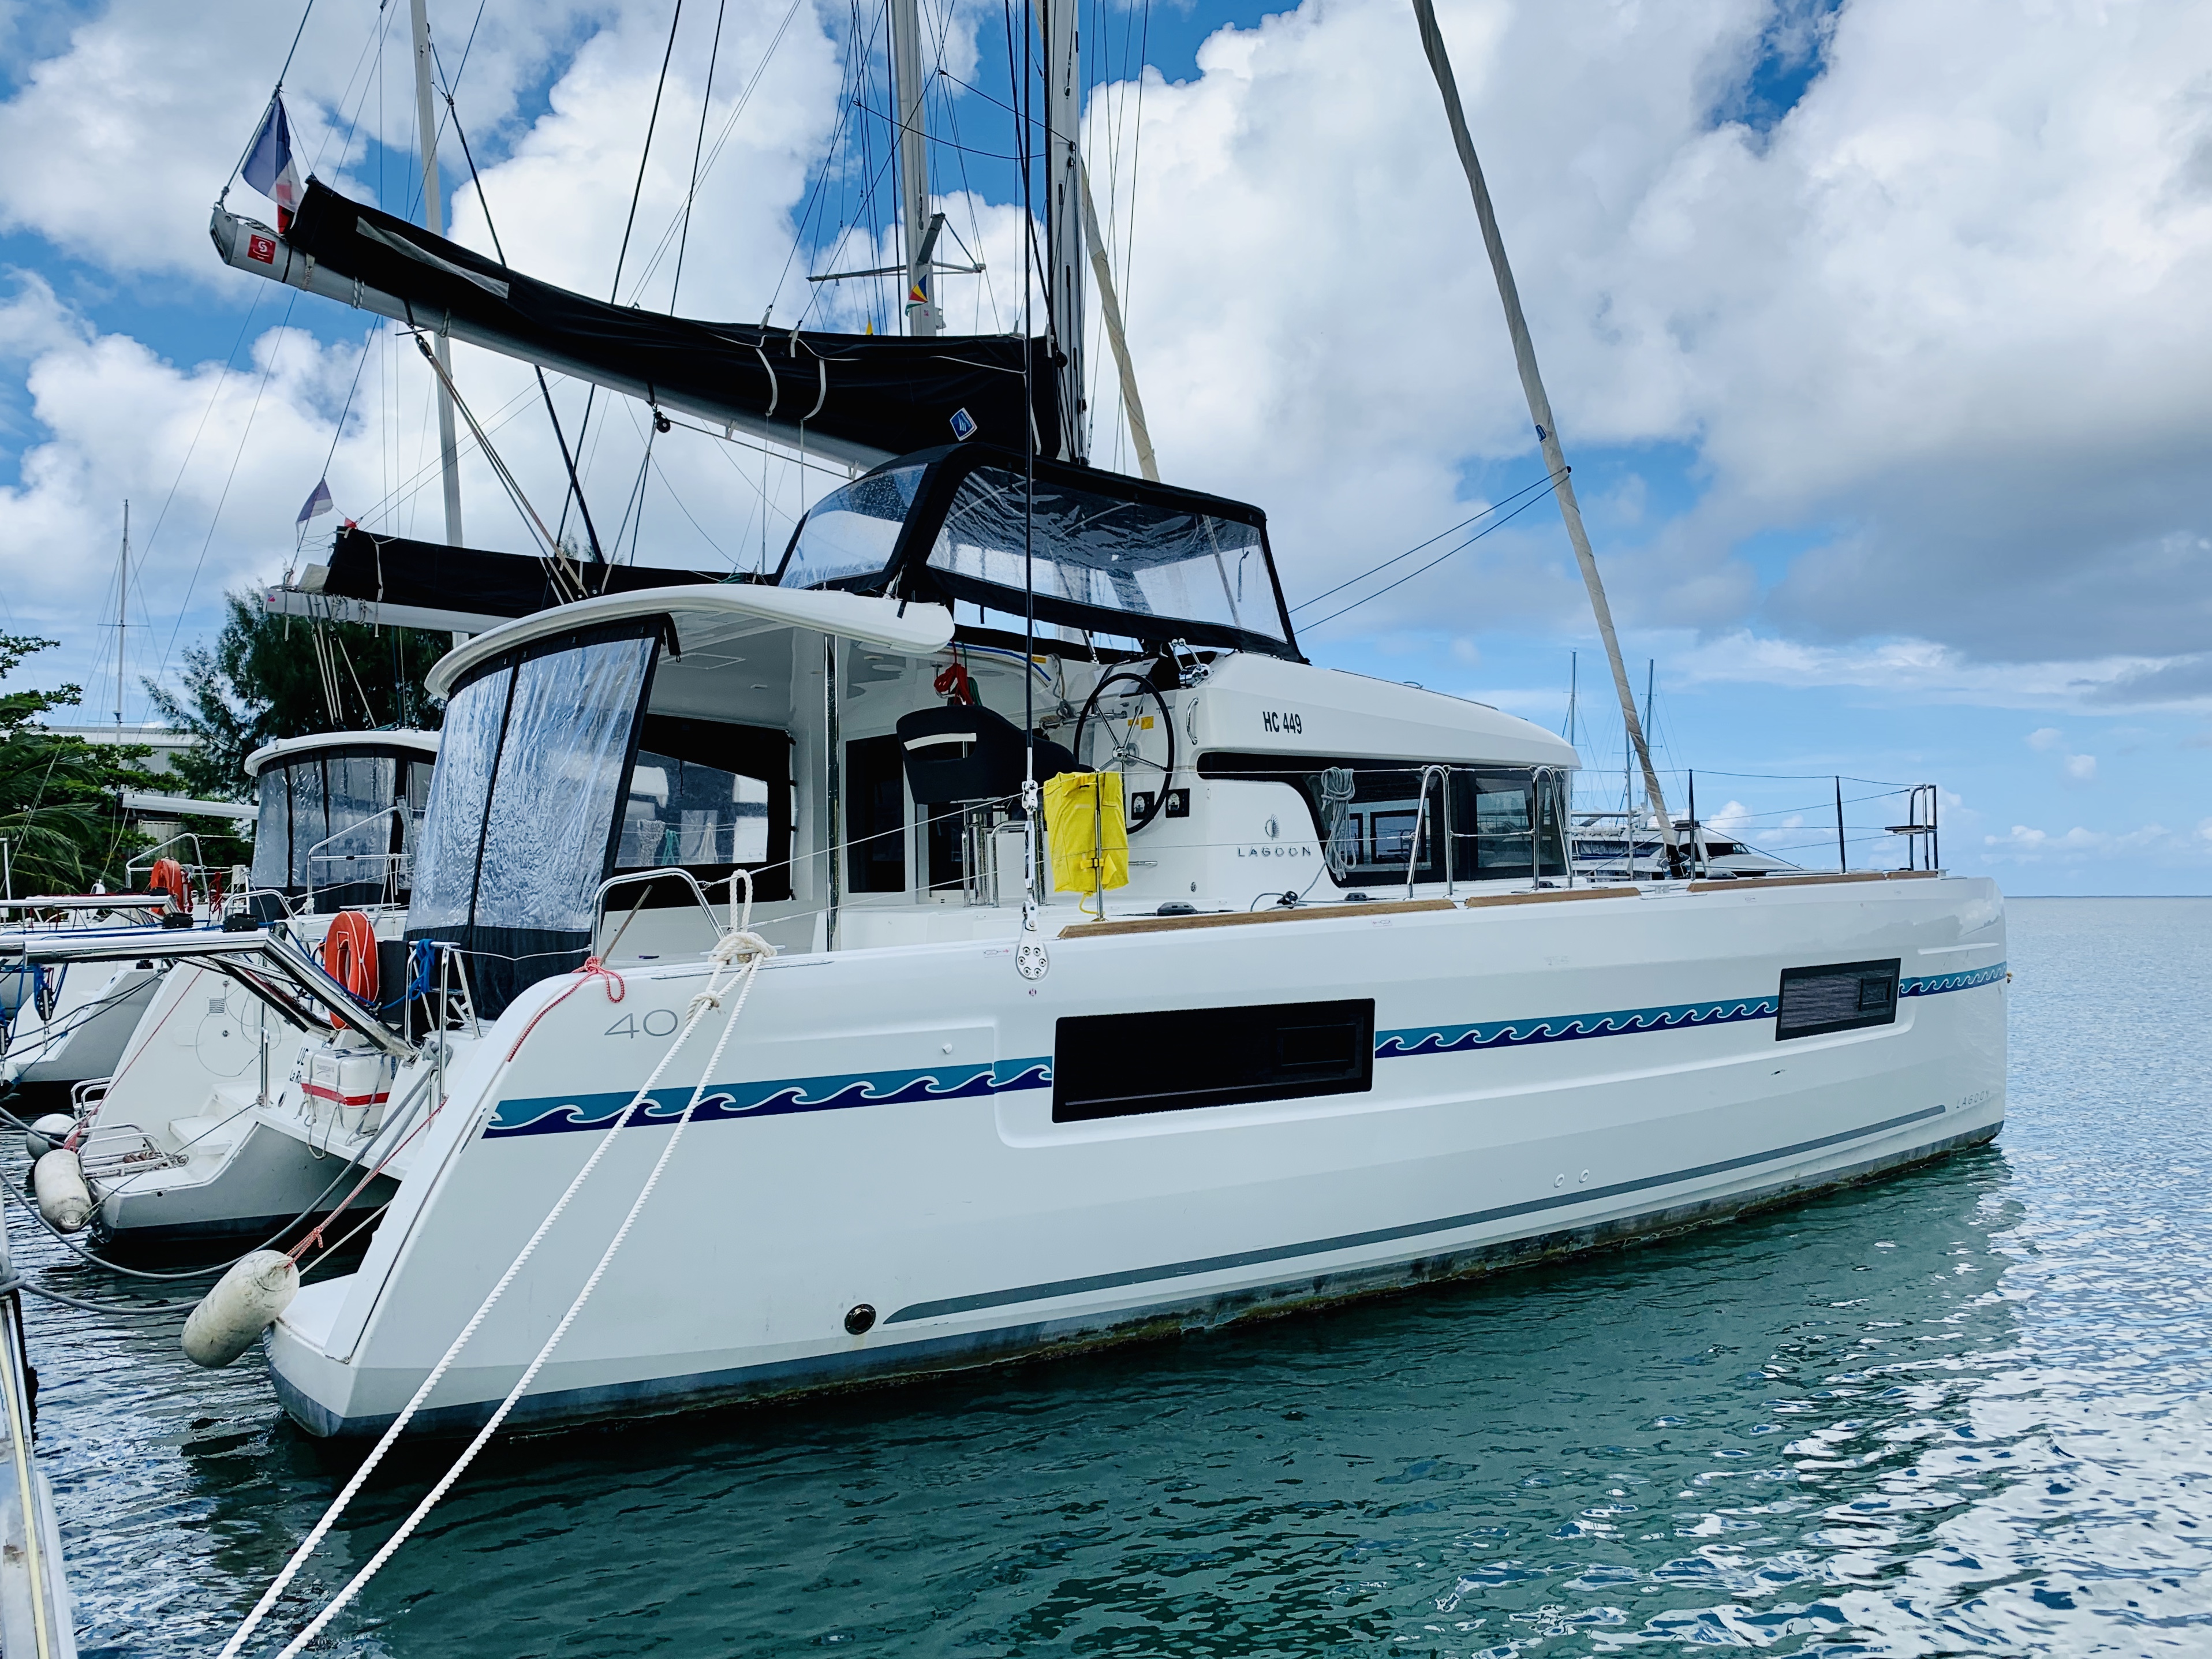 Lagoon 40 - Yacht Charter Martinique & Boat hire in Martinique Le Marin Marina du Marin 3